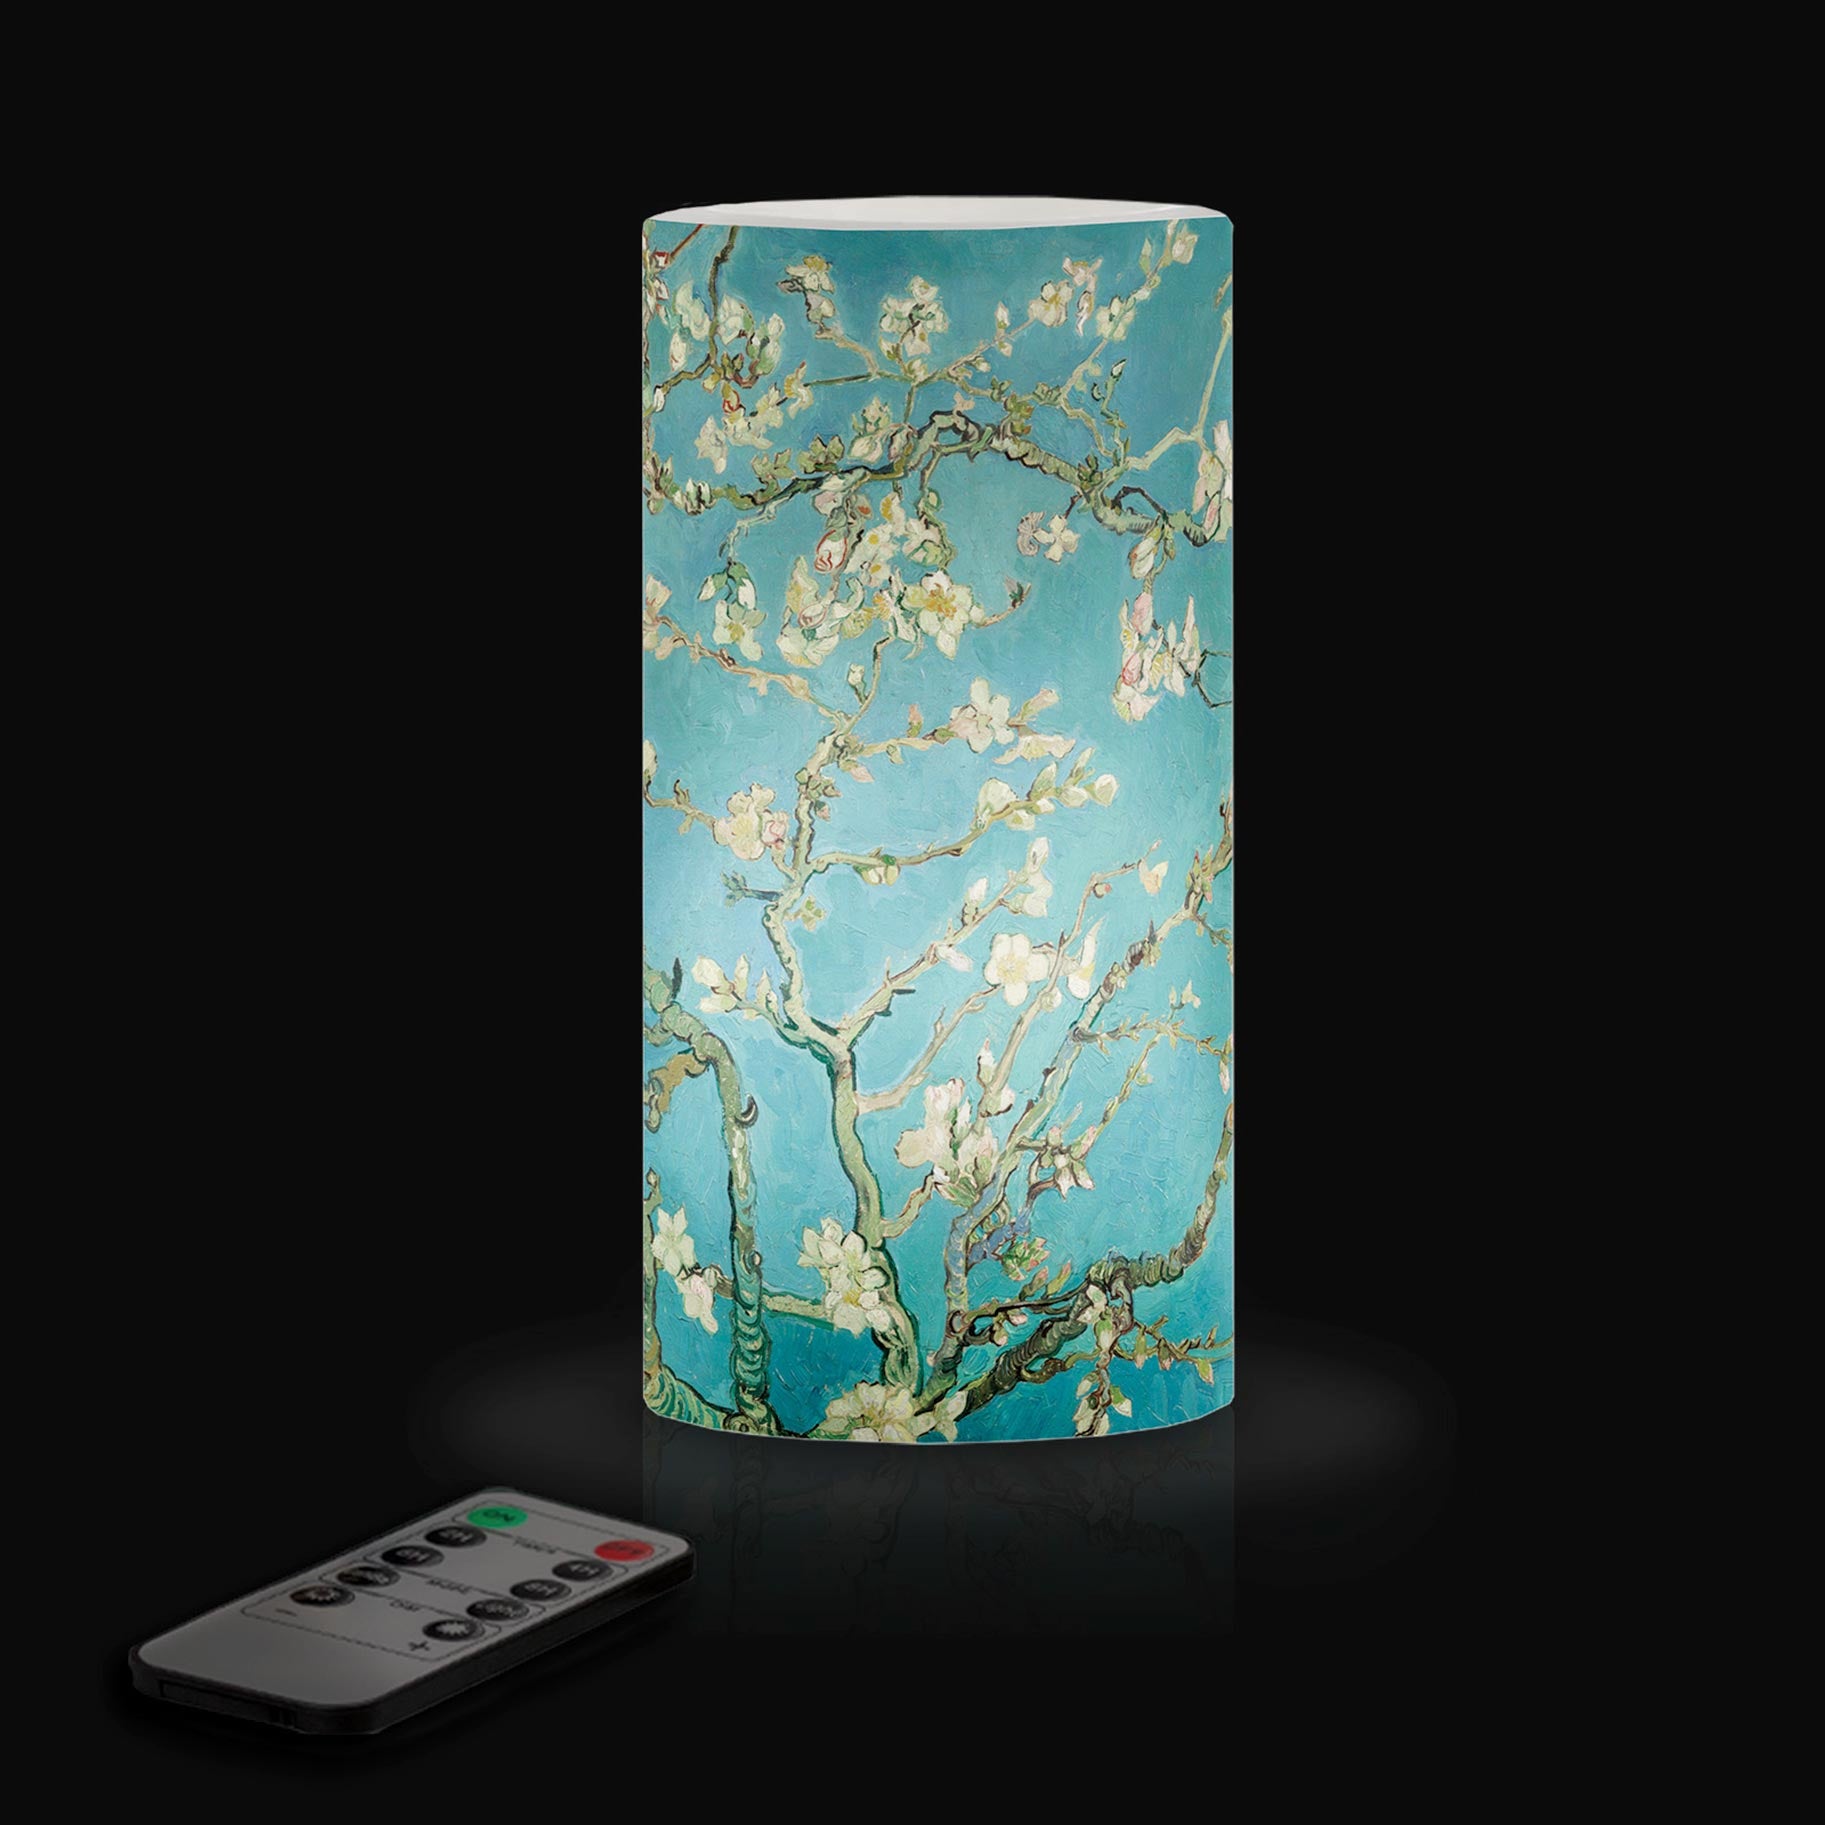 van Gogh Almond Blossom 6" LED Real Wax Candle with Remote